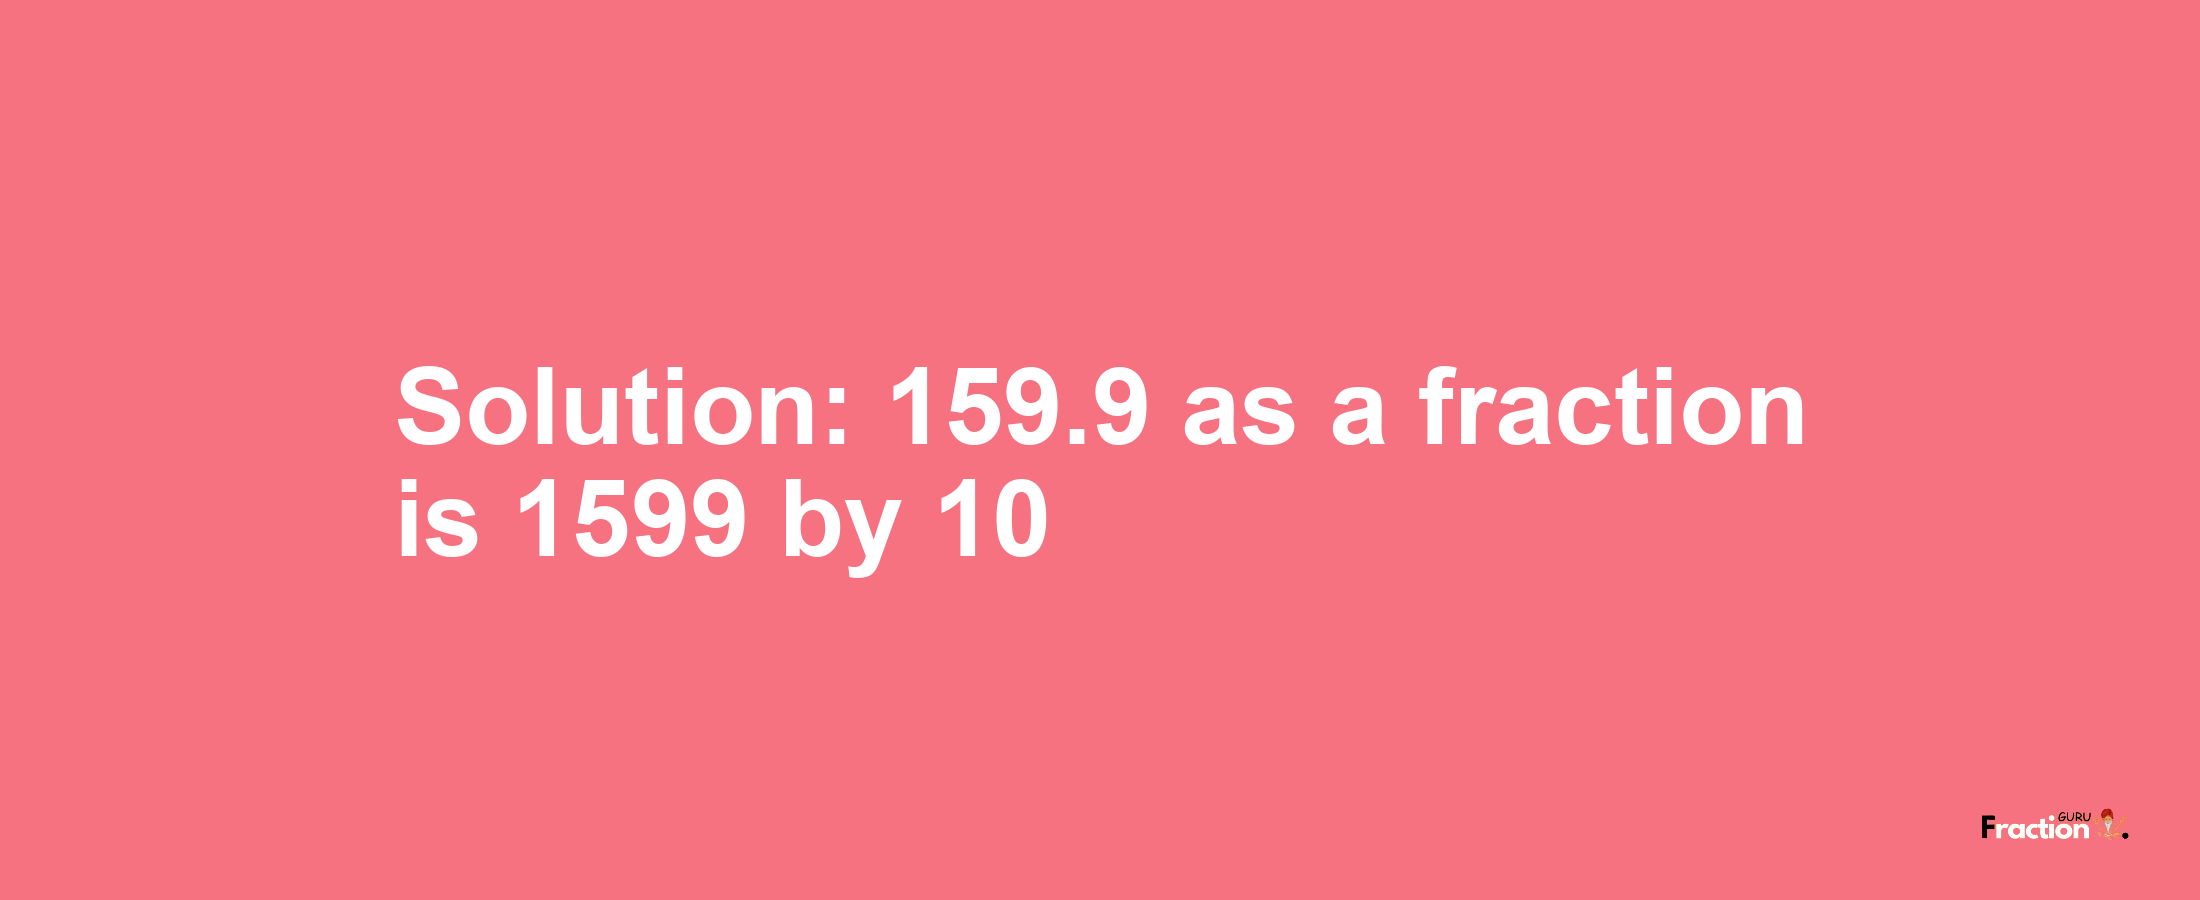 Solution:159.9 as a fraction is 1599/10